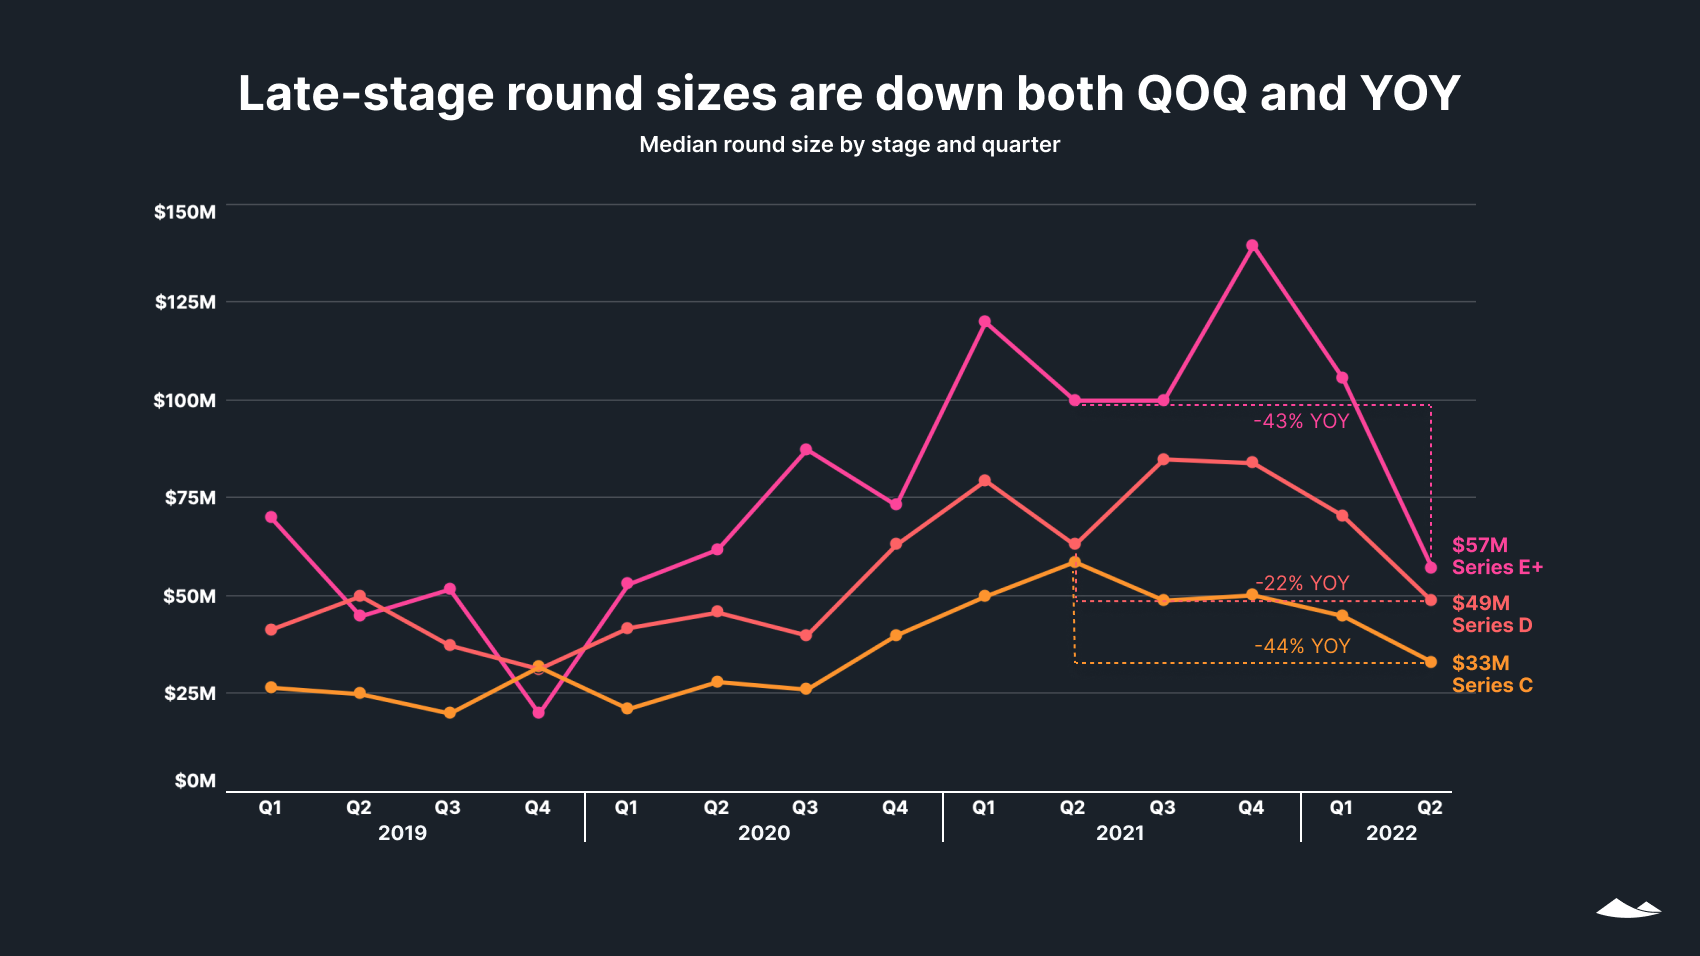 Late-stage round sizes are down both QOQ and YOY: Median round size by stage and quarter. Line chart 